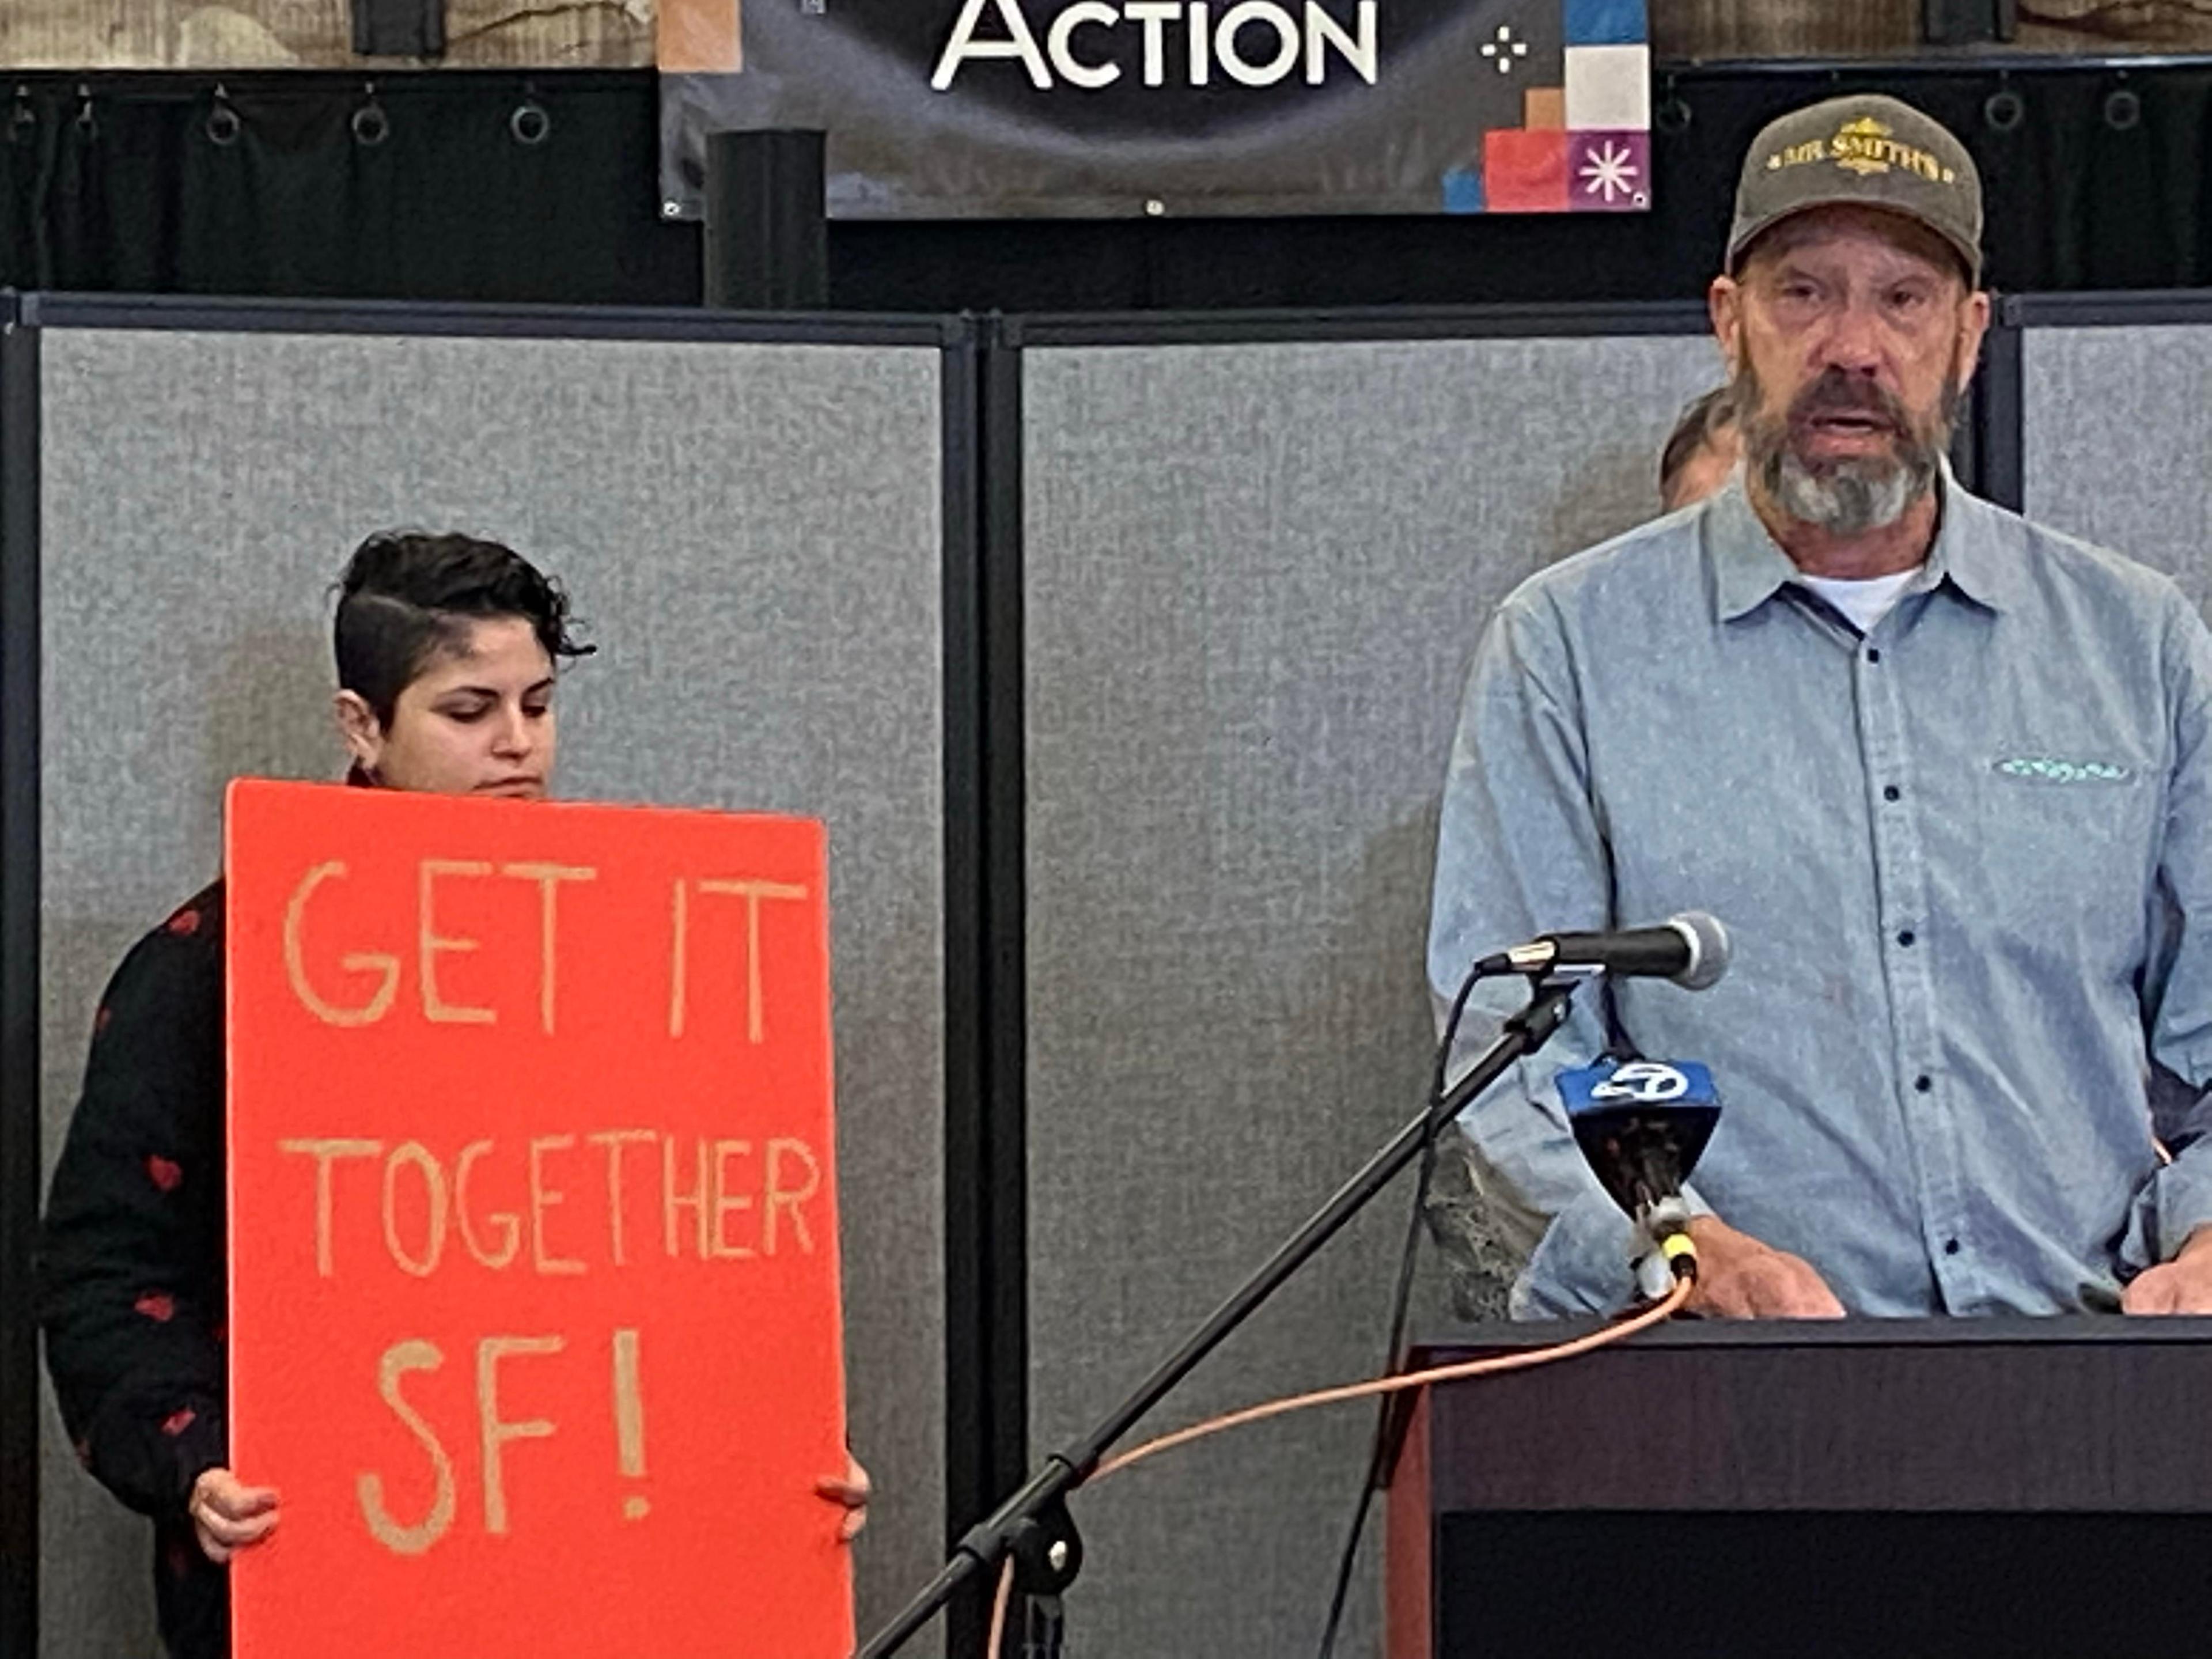 Max Young, a bar owner, stands behind a podium next to a women with a sign reading &quot;get it together SF.&quot;